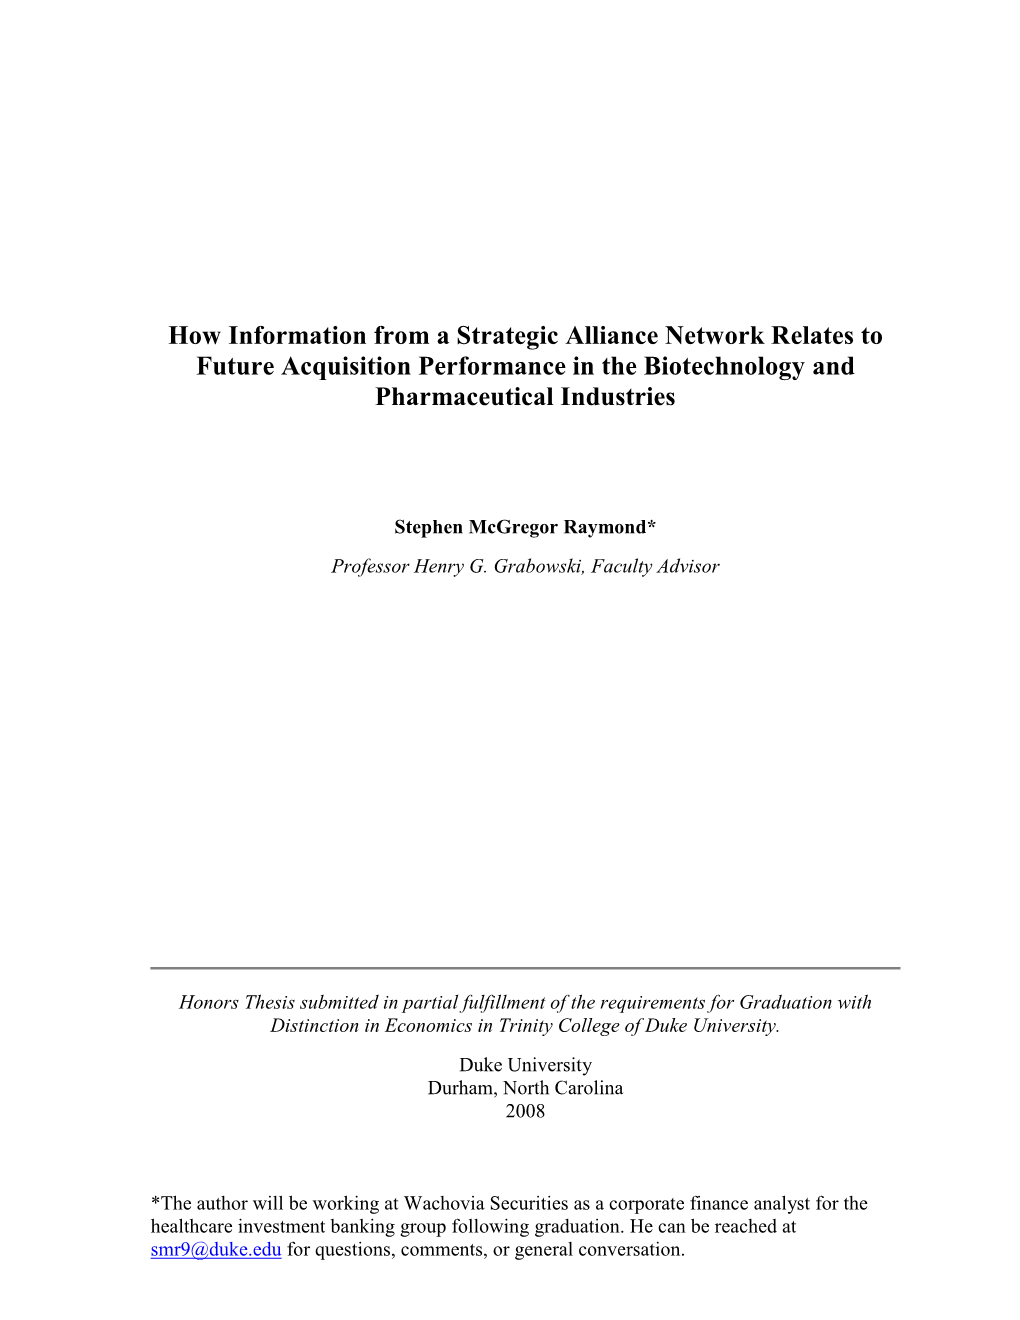 How Information from a Strategic Alliance Network Relates to Future Acquisition Performance in the Biotechnology and Pharmaceutical Industries